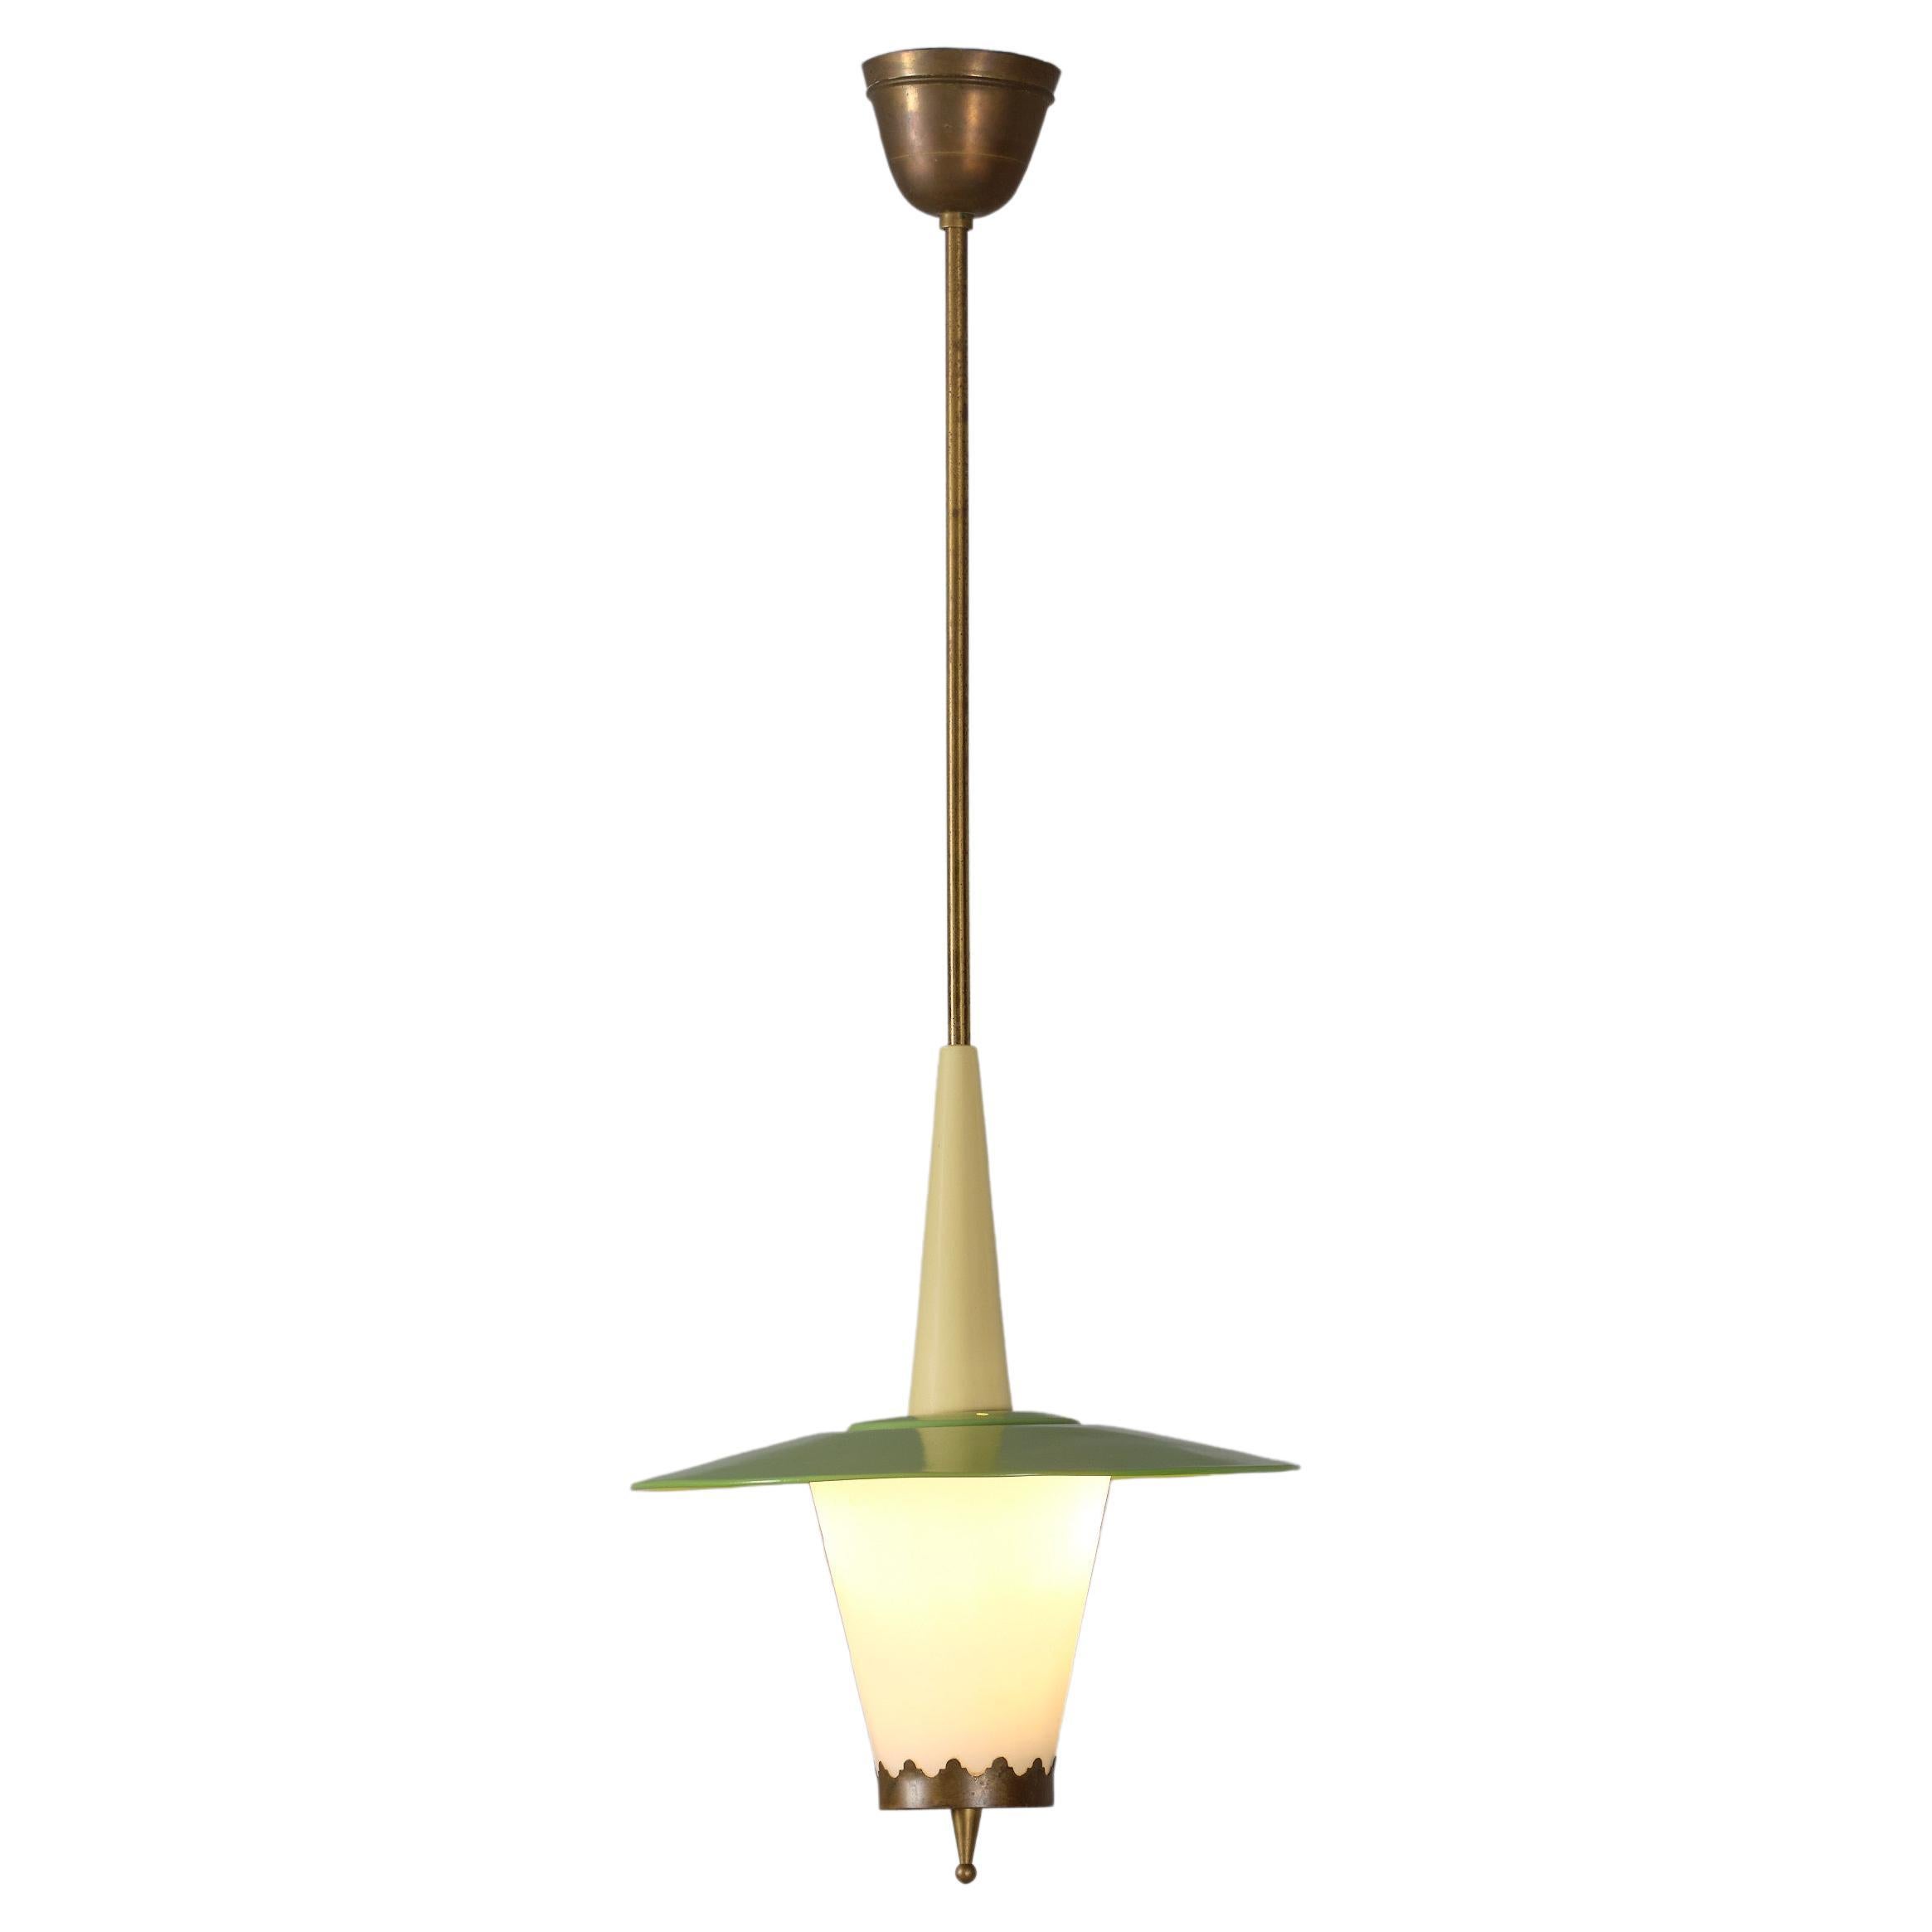 Vintage Italian Pendant Lamp in Brass, Iron and Opaline Glass, 1950s